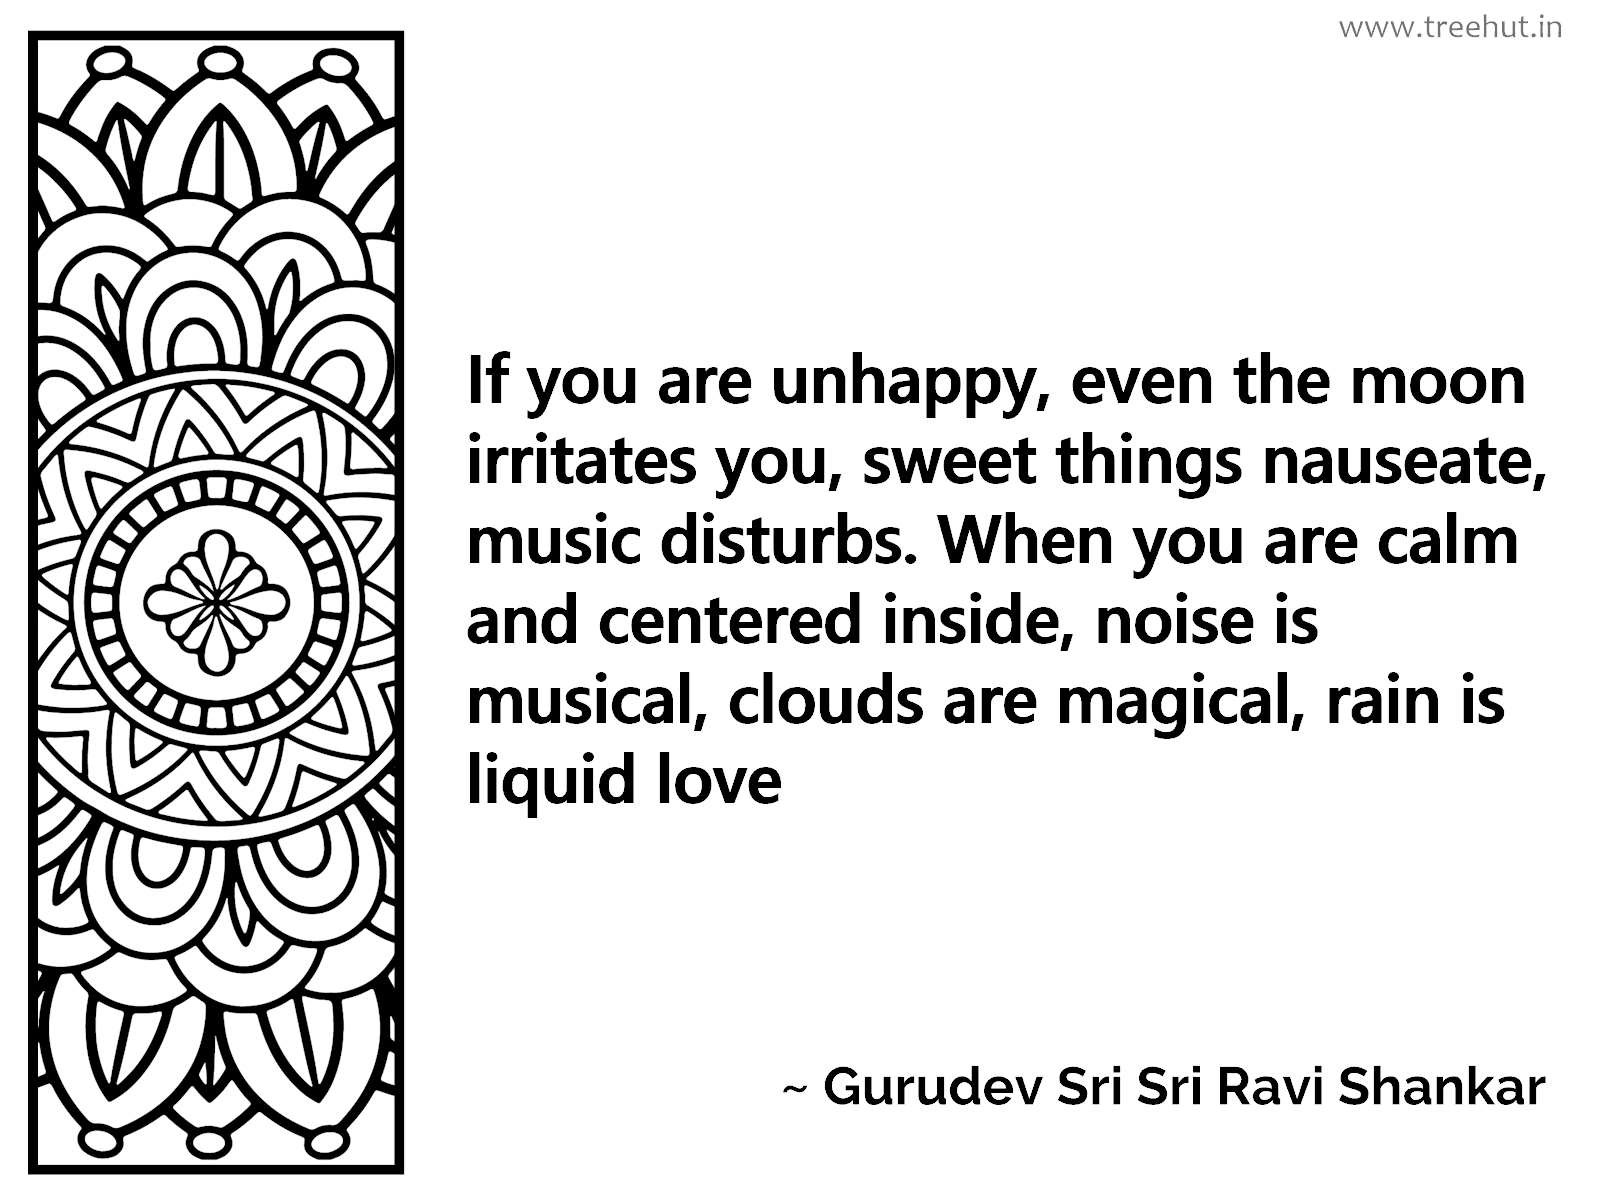 If you are unhappy, even the moon irritates you, sweet things nauseate, music disturbs. When you are calm and centered inside, noise is musical, clouds are magical, rain is liquid love Inspirational Quote by Gurudev Sri Sri Ravi Shankar, coloring pages